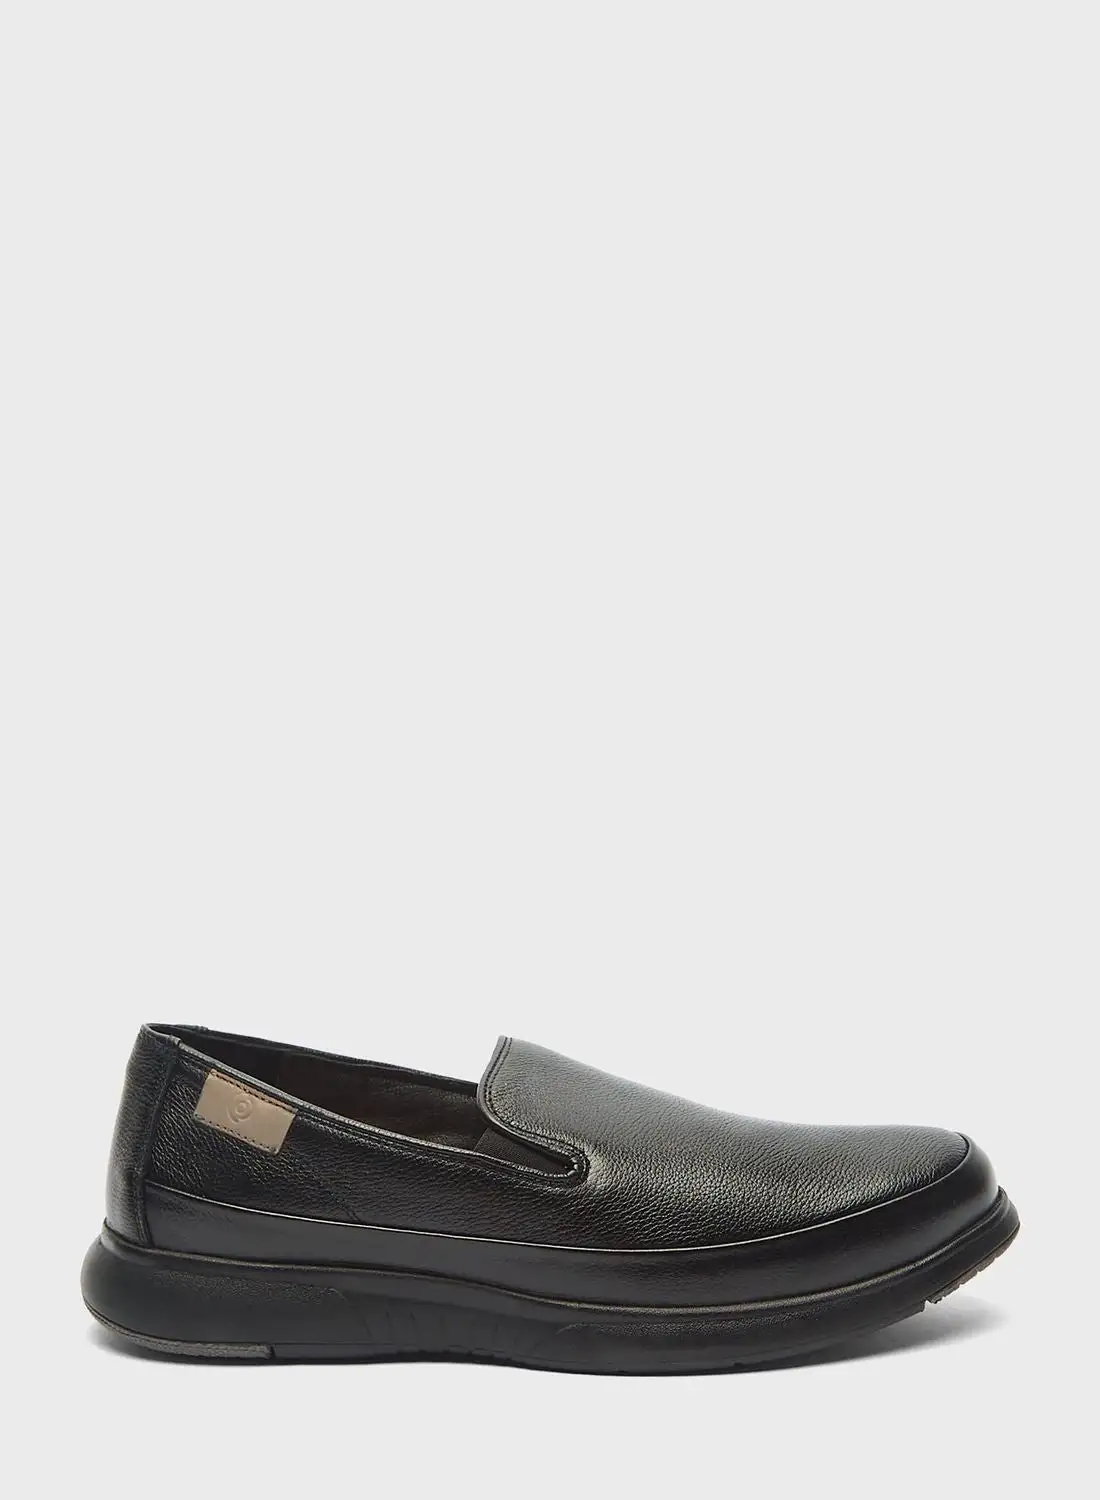 Le Confort Casual Slip Ons Shoes